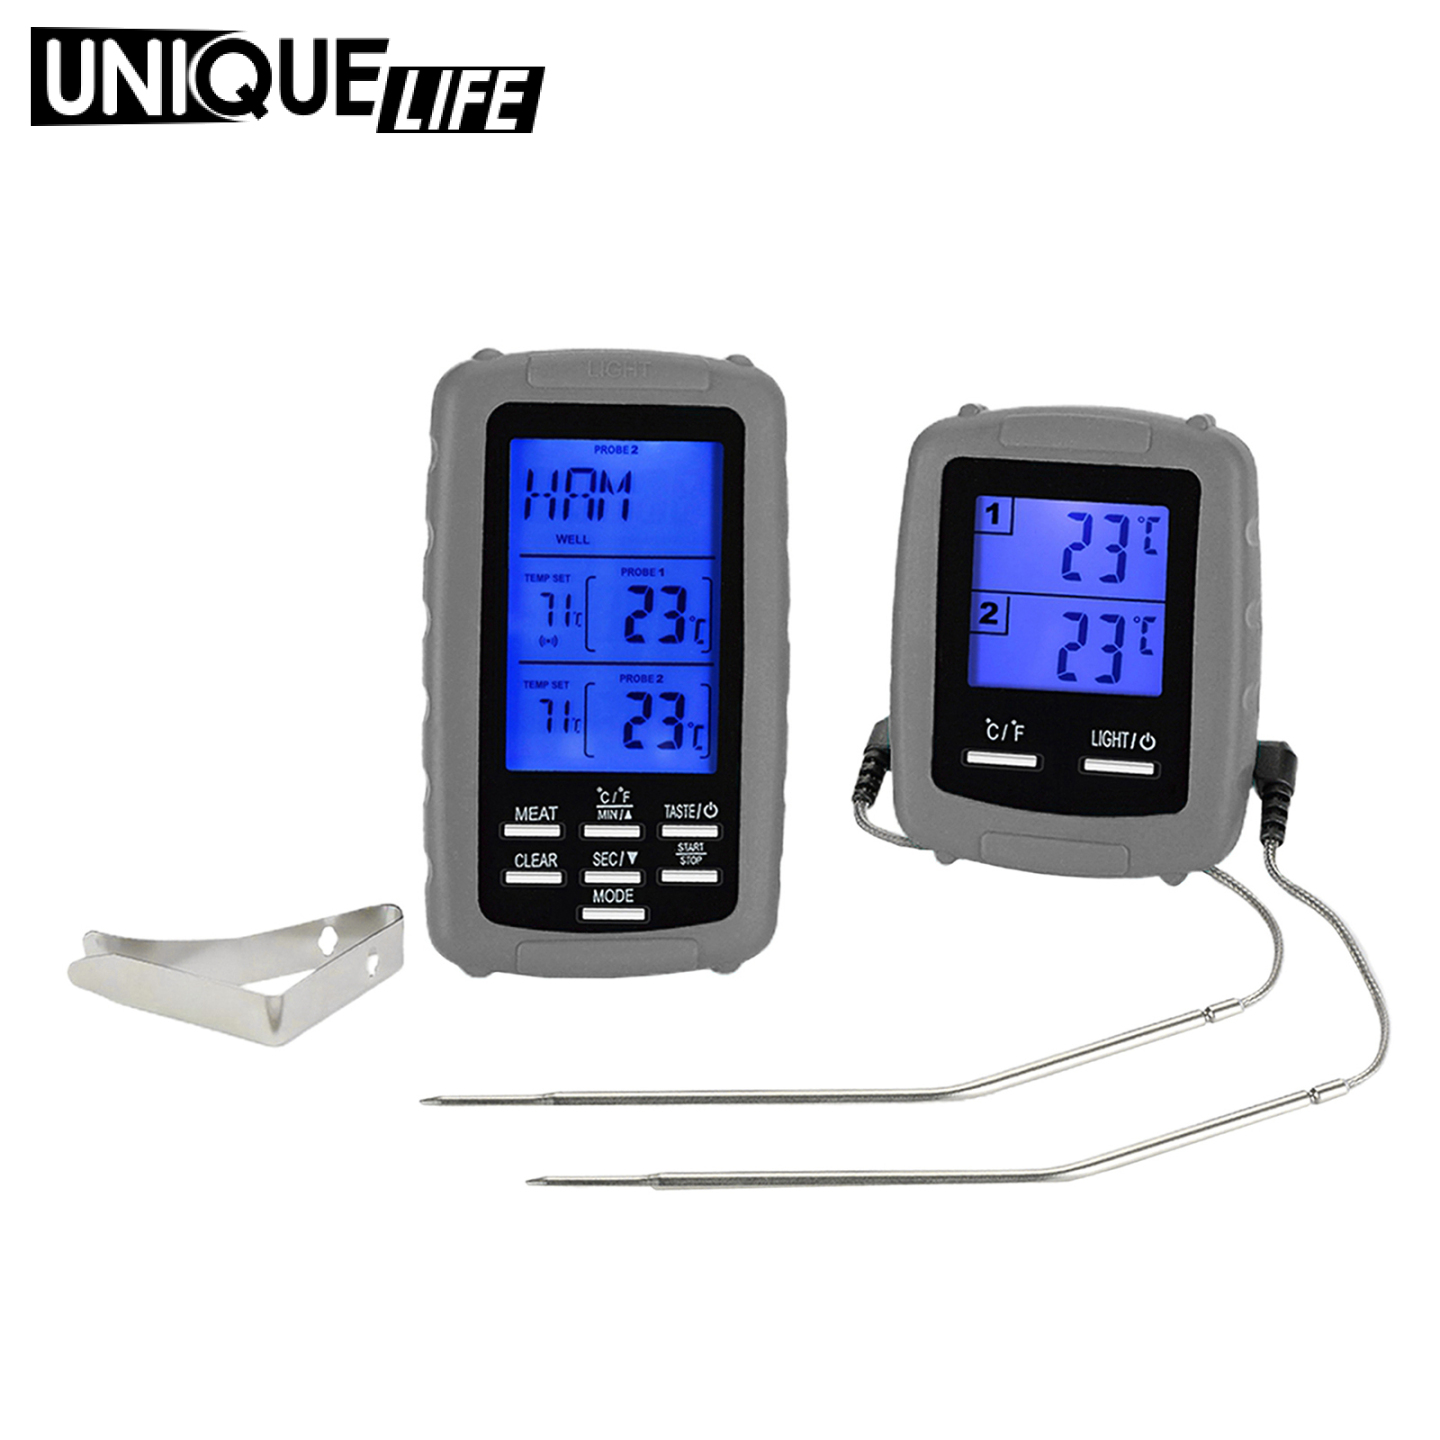 [Unique Life]BBQ Food Thermometer Barbecue Baking Fry Chef Cooking Instant Read Red